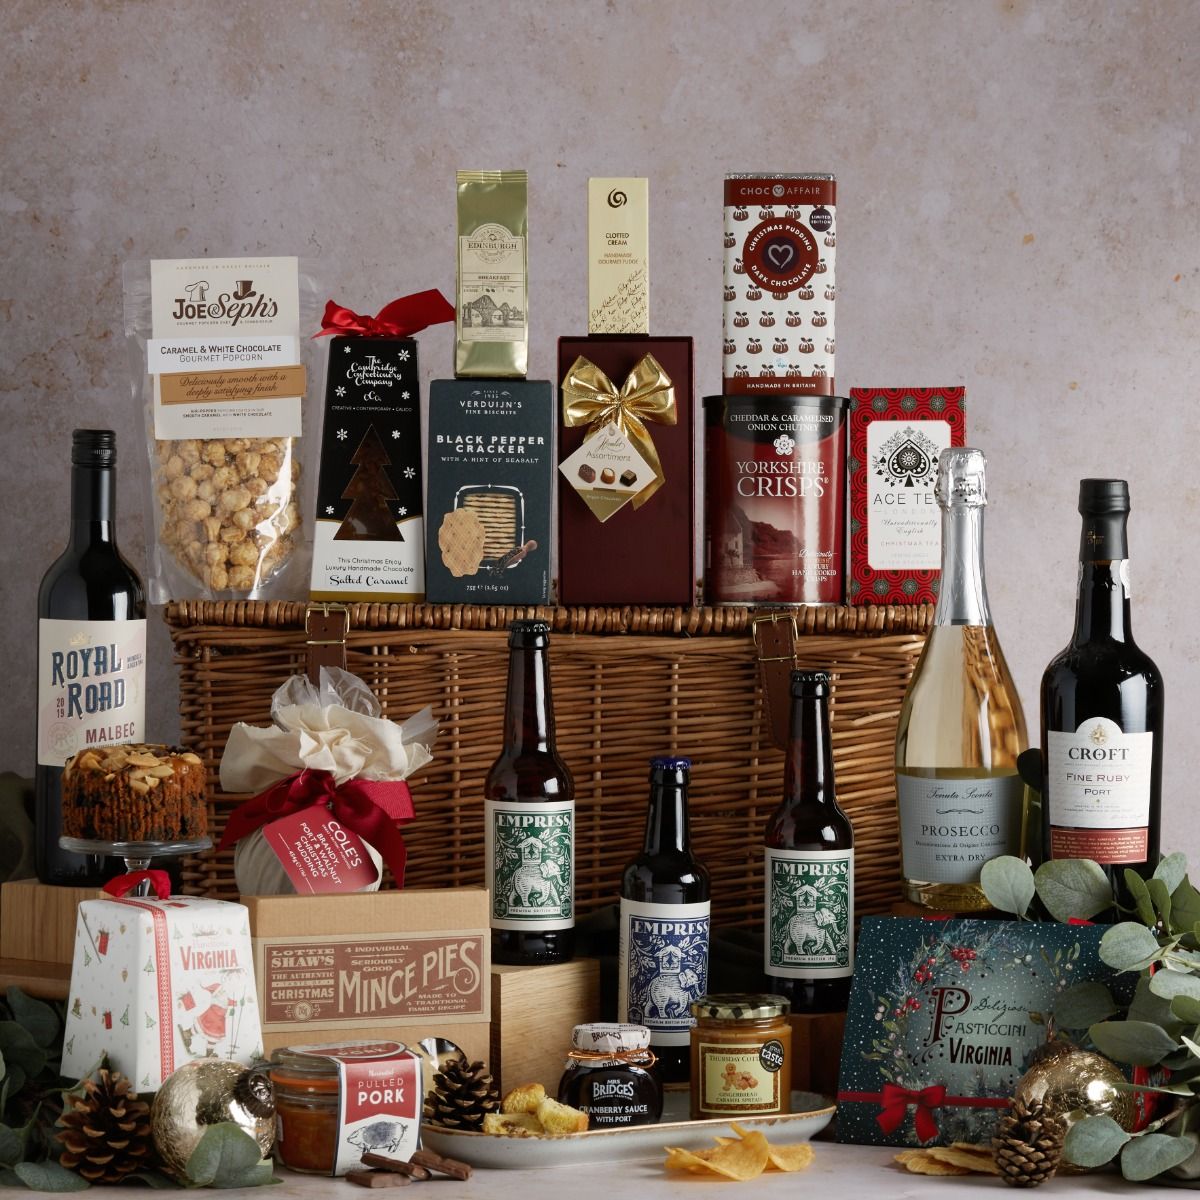 The Luxury Family Christmas Hamper with its contents on display and a wicker basket